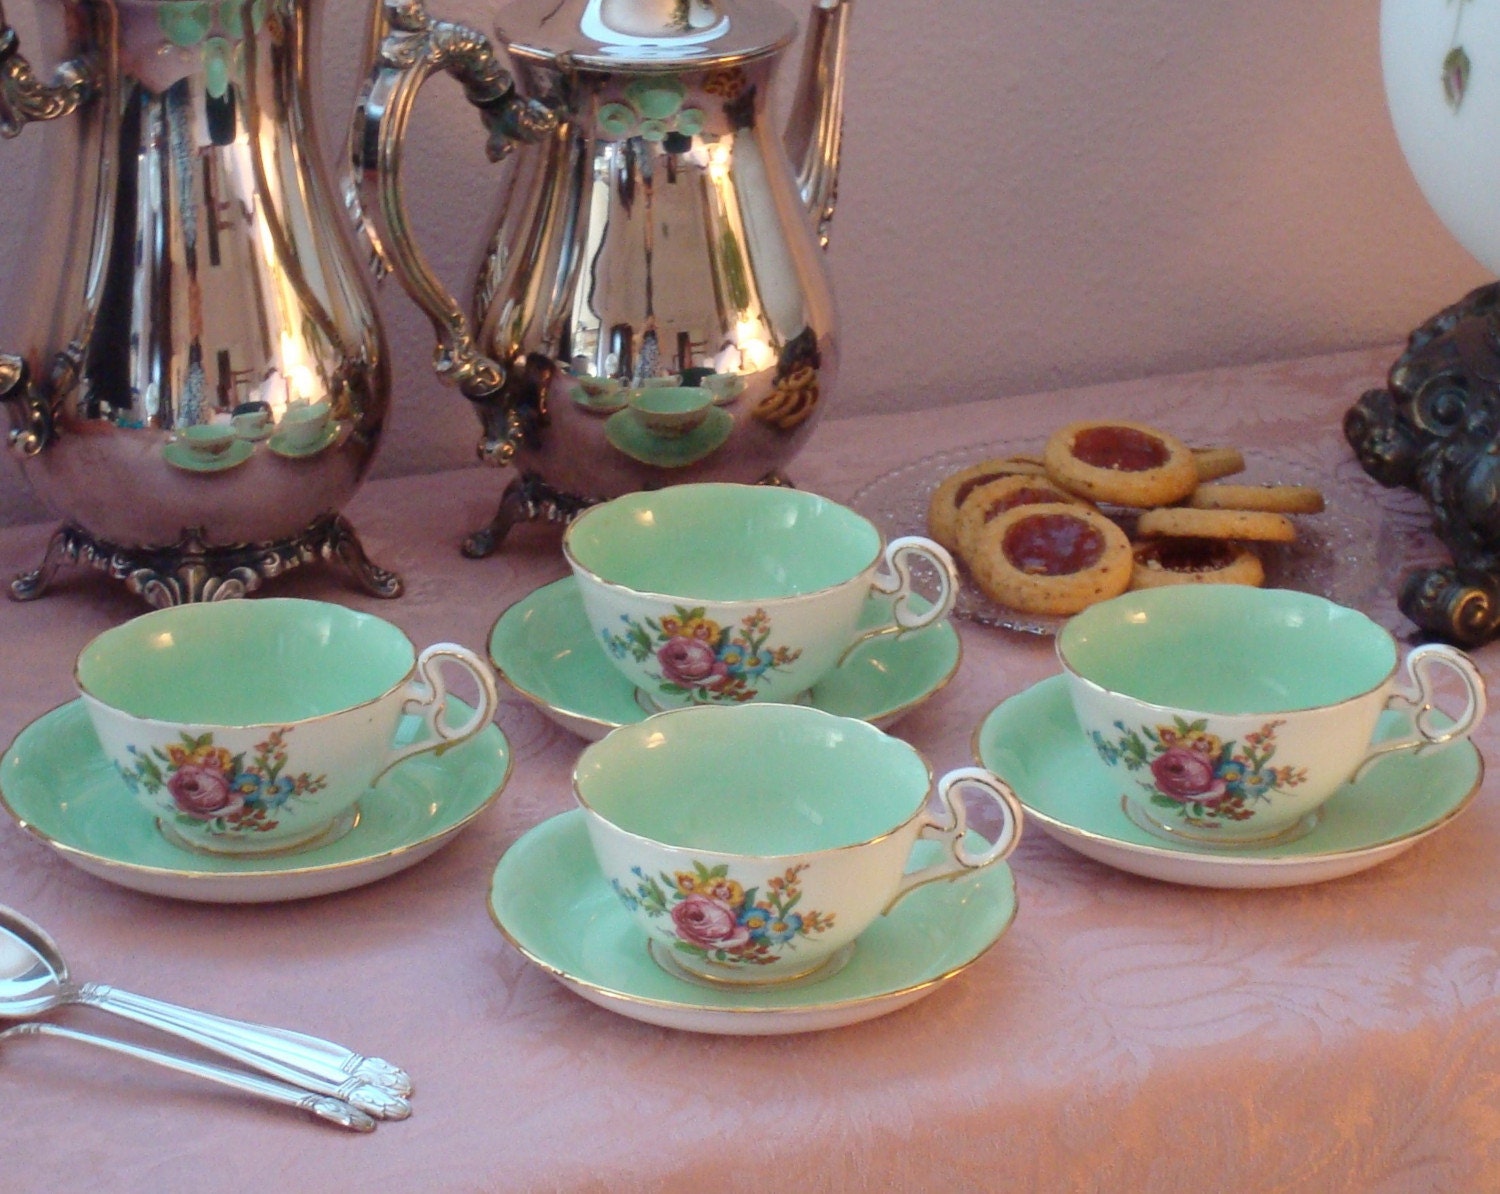 Tea Time Necessity....Set of Four Vintage Royal Grafton Tea Cups and Saucers Footed